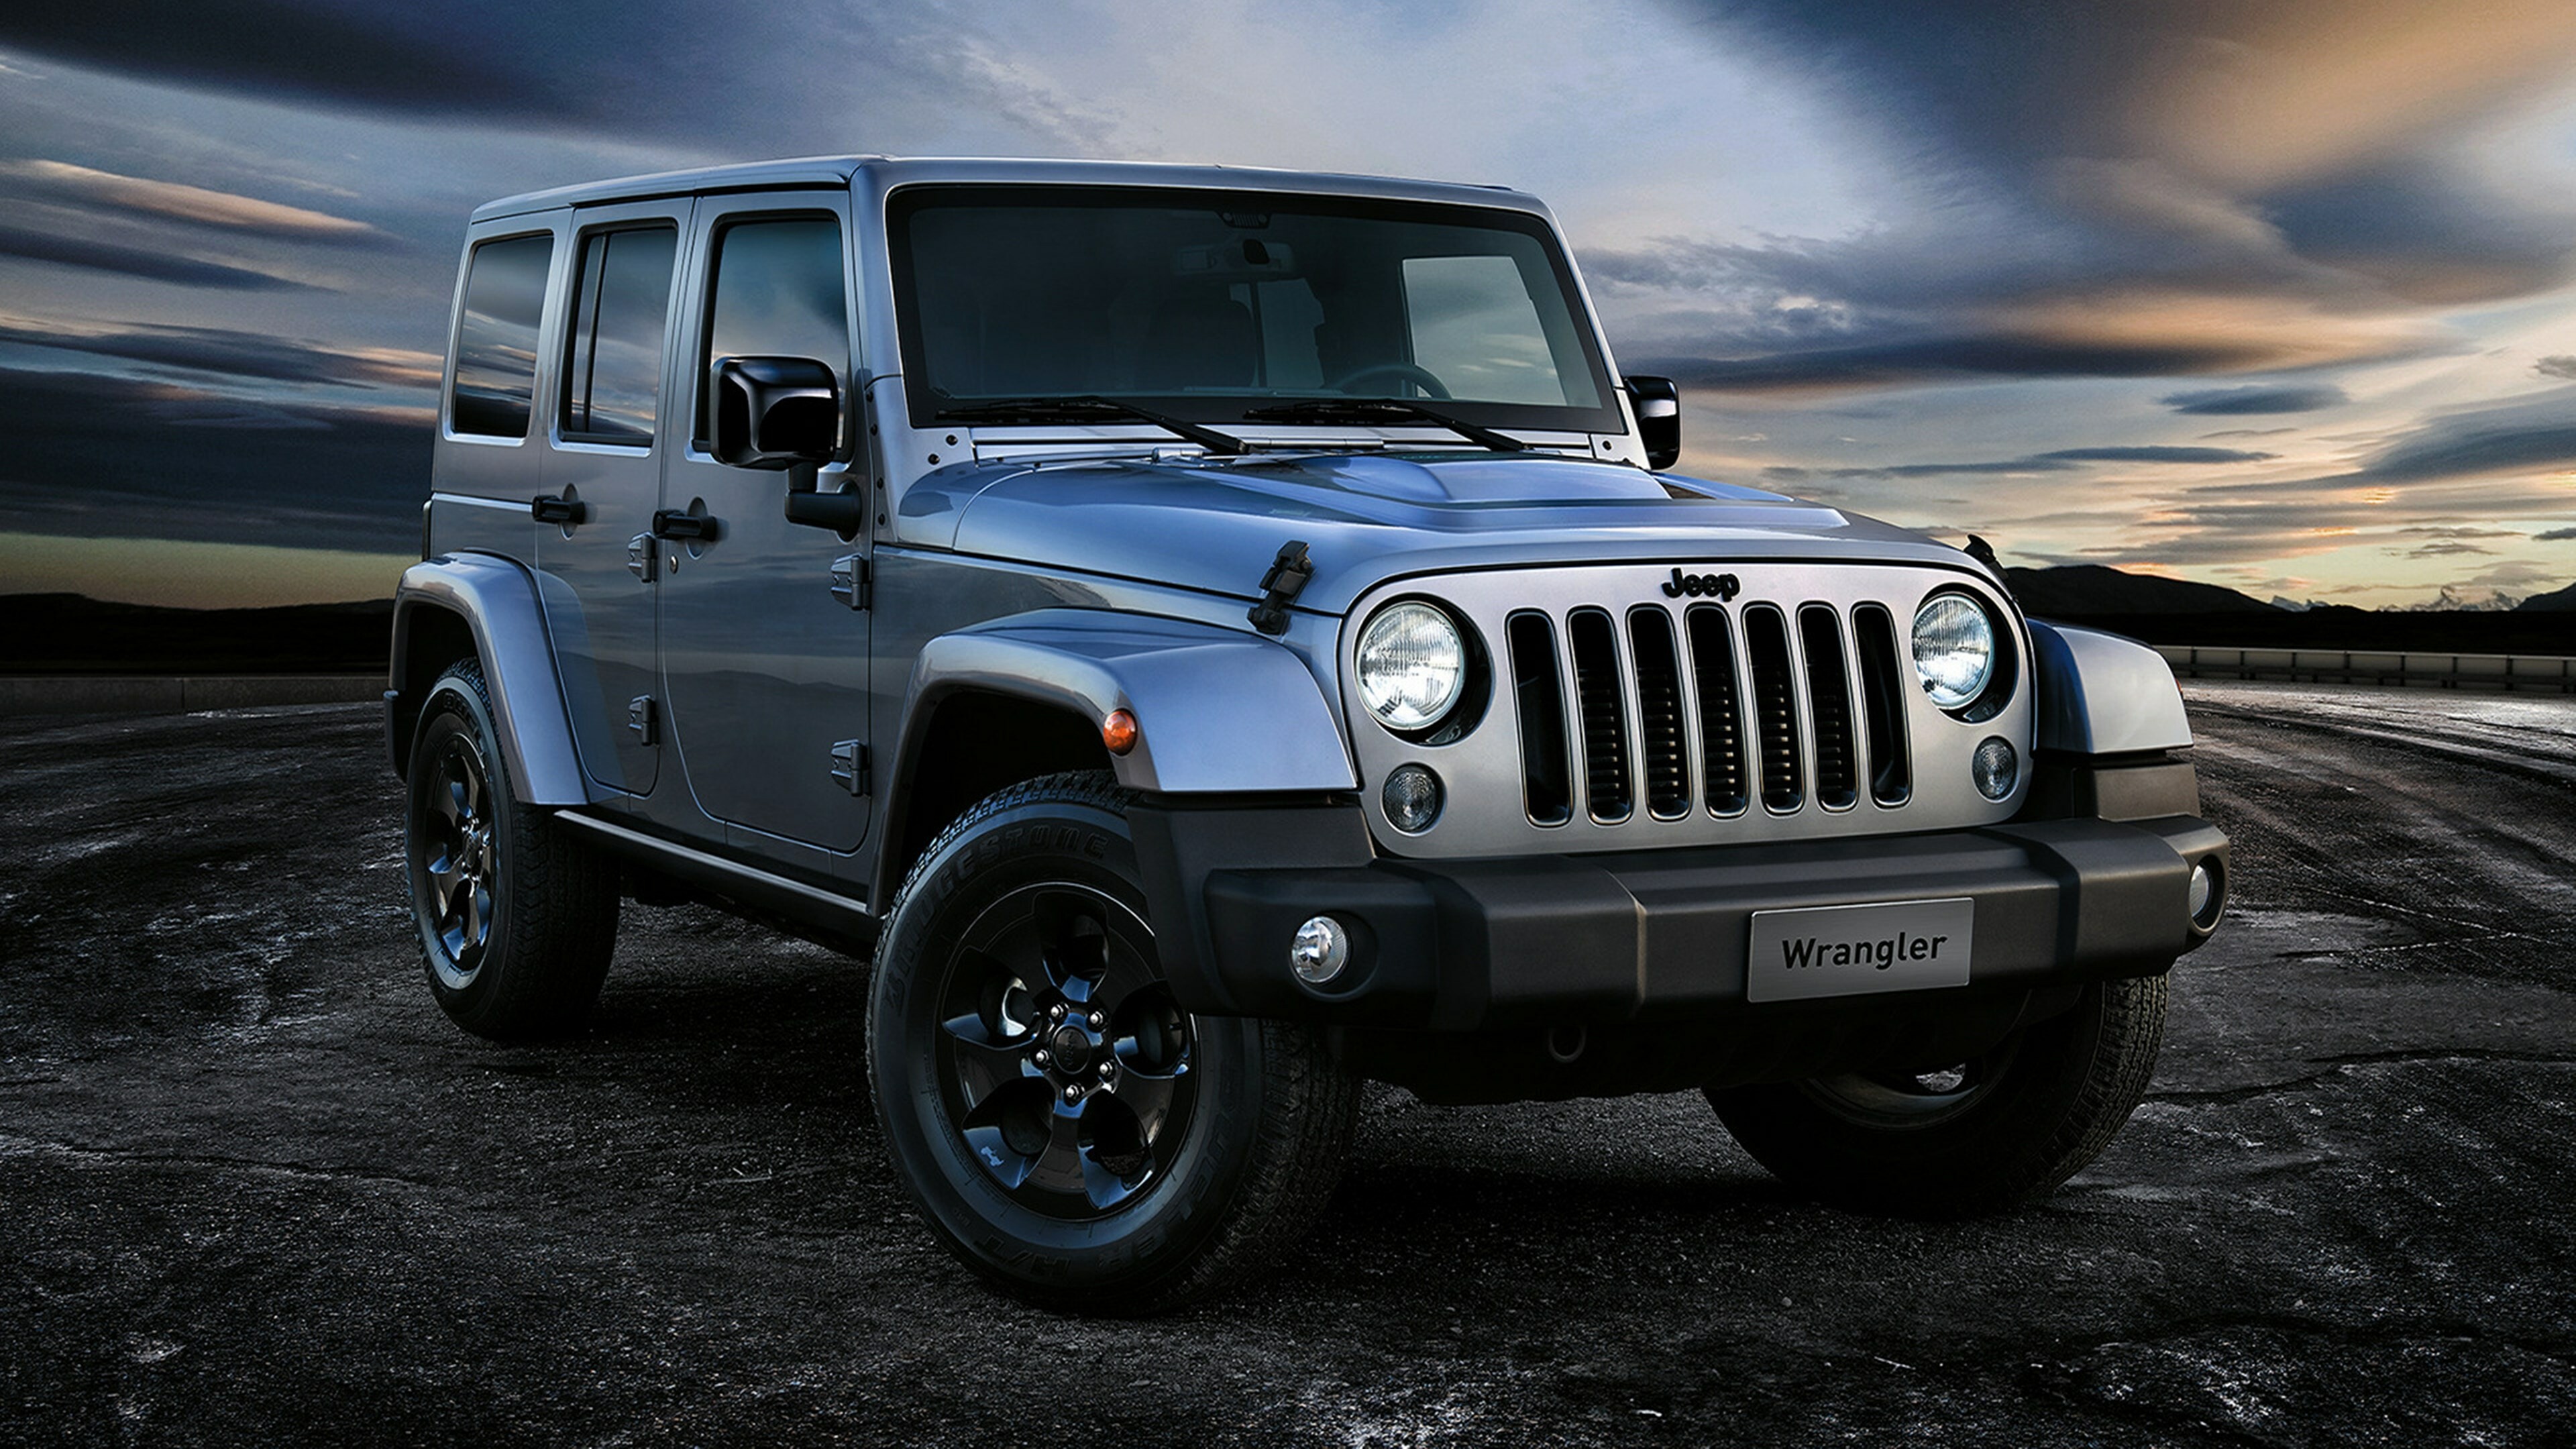 Jeep Wrangler: The JL model, The most recent generation, was unveiled in late 2017. 3840x2160 4K Wallpaper.